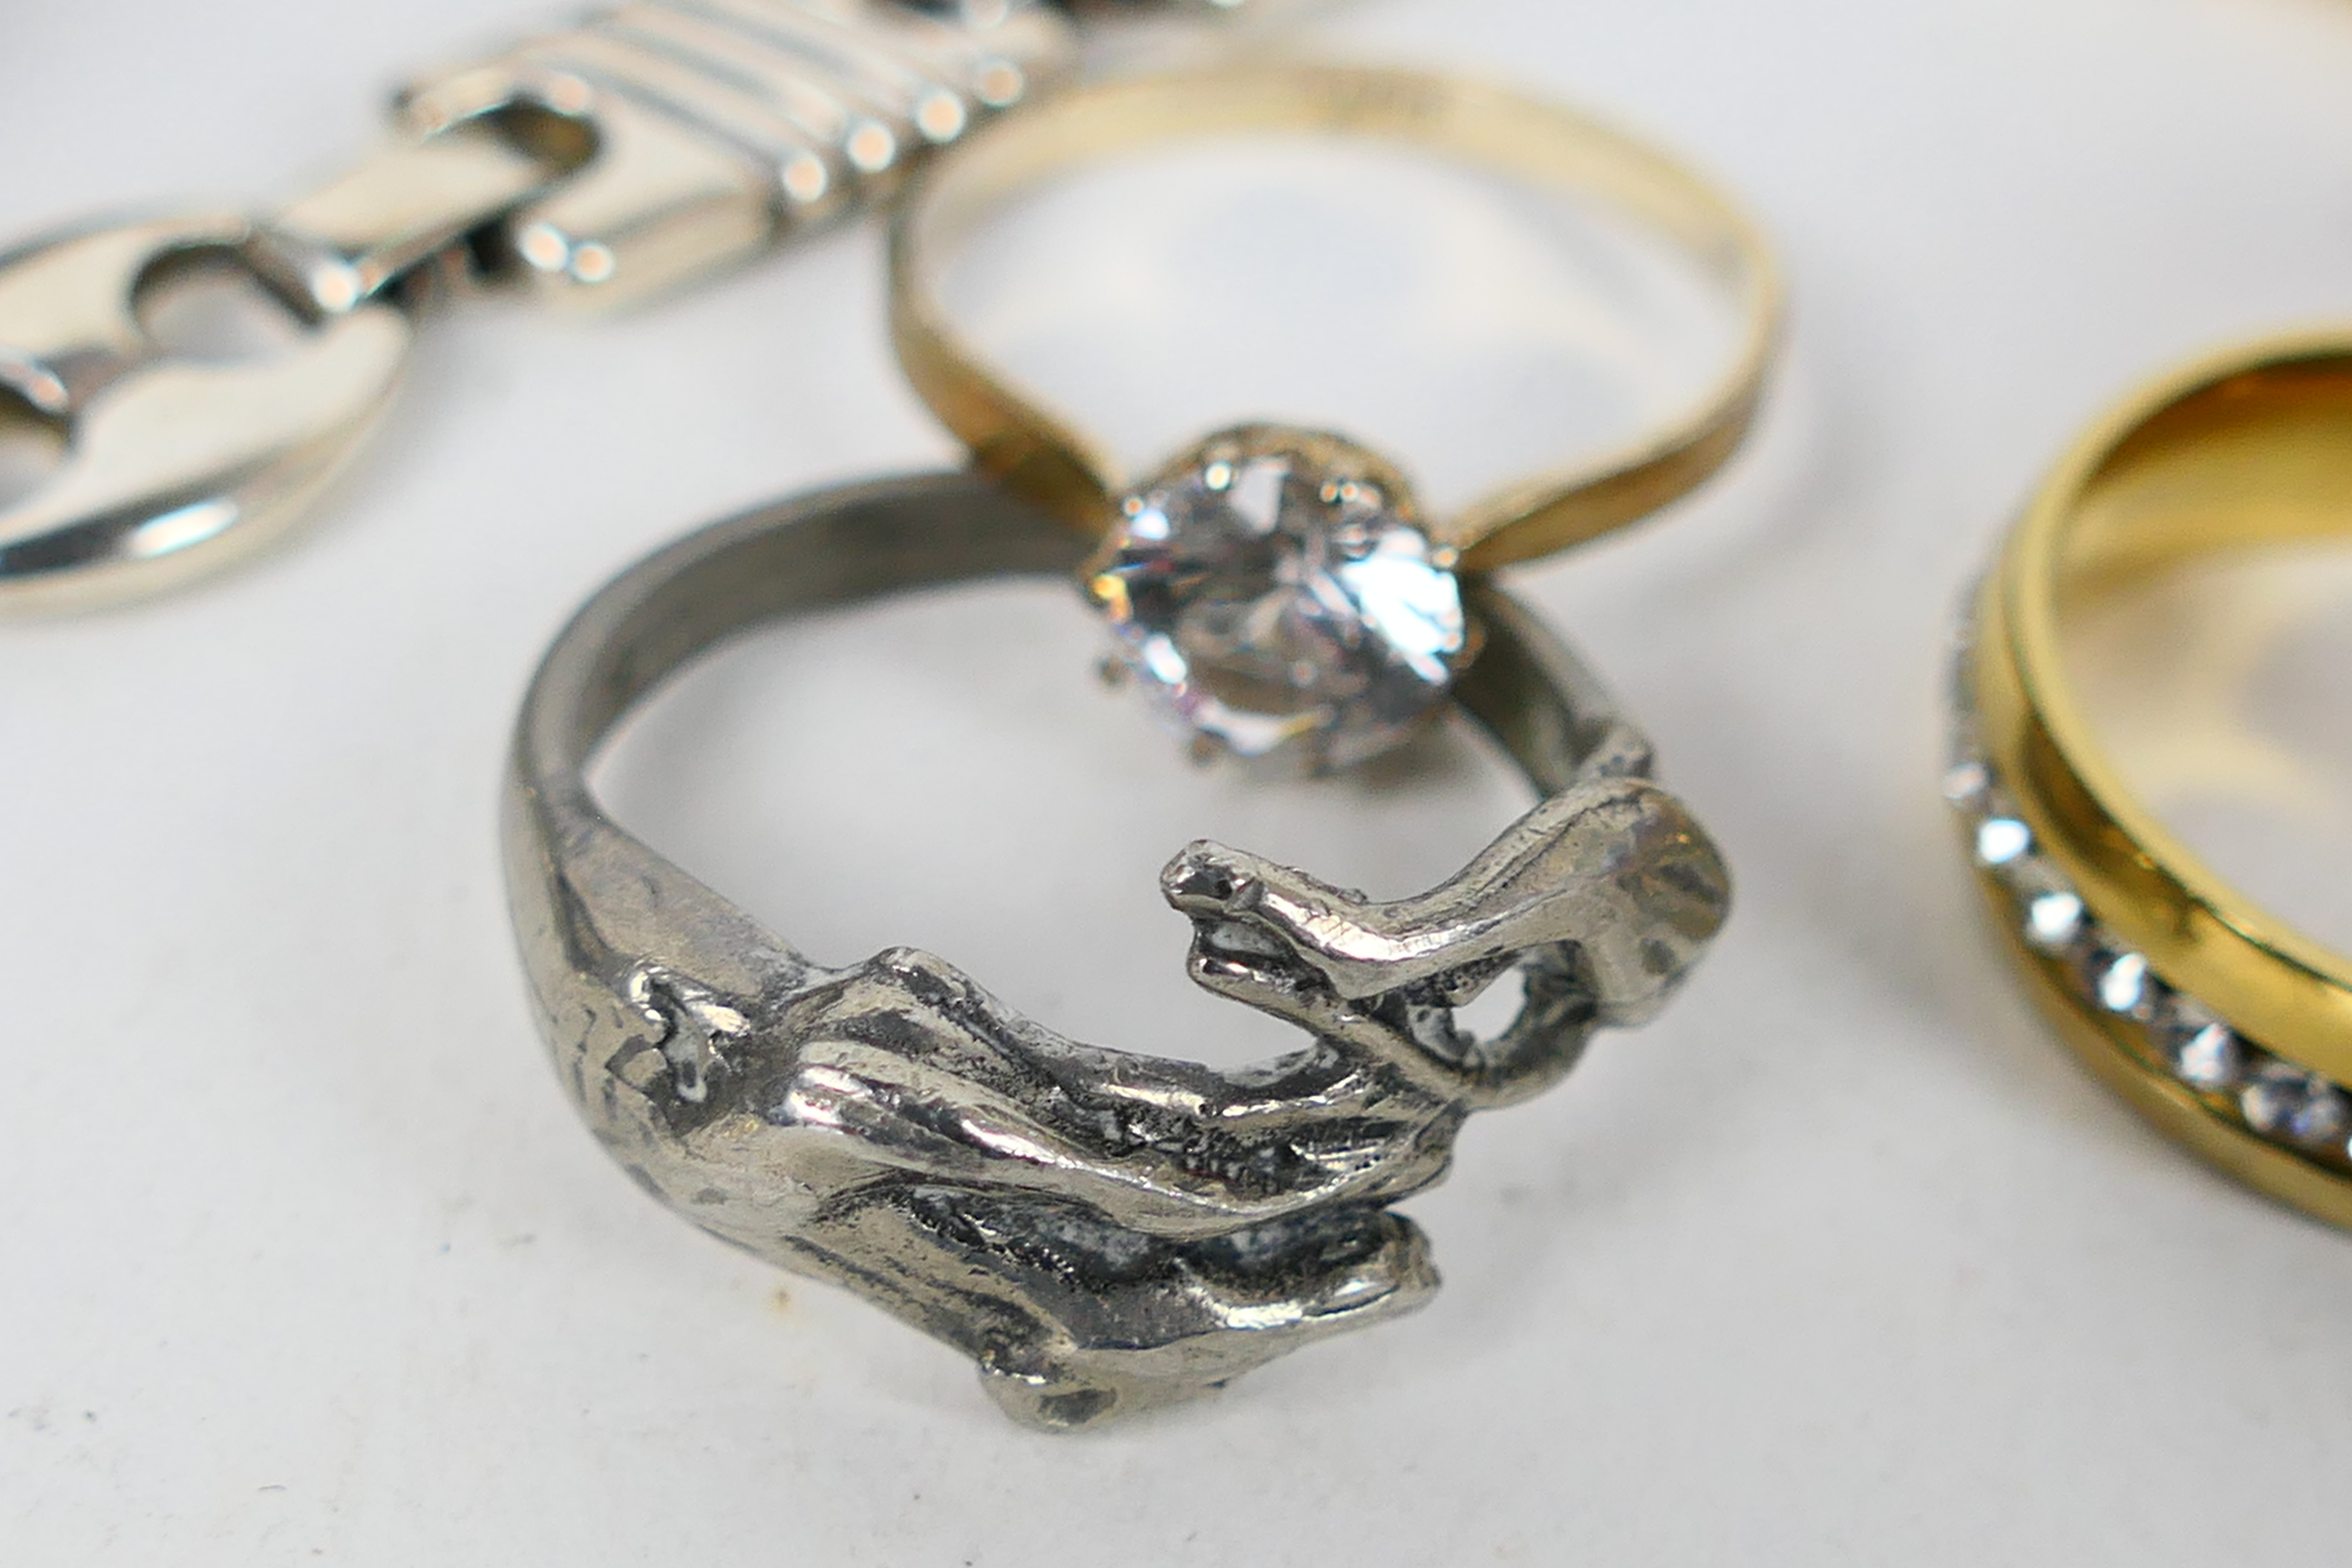 A small collection of costume jewellery, rings and bracelets, some pieces stamped 925 / Silver. - Image 7 of 7